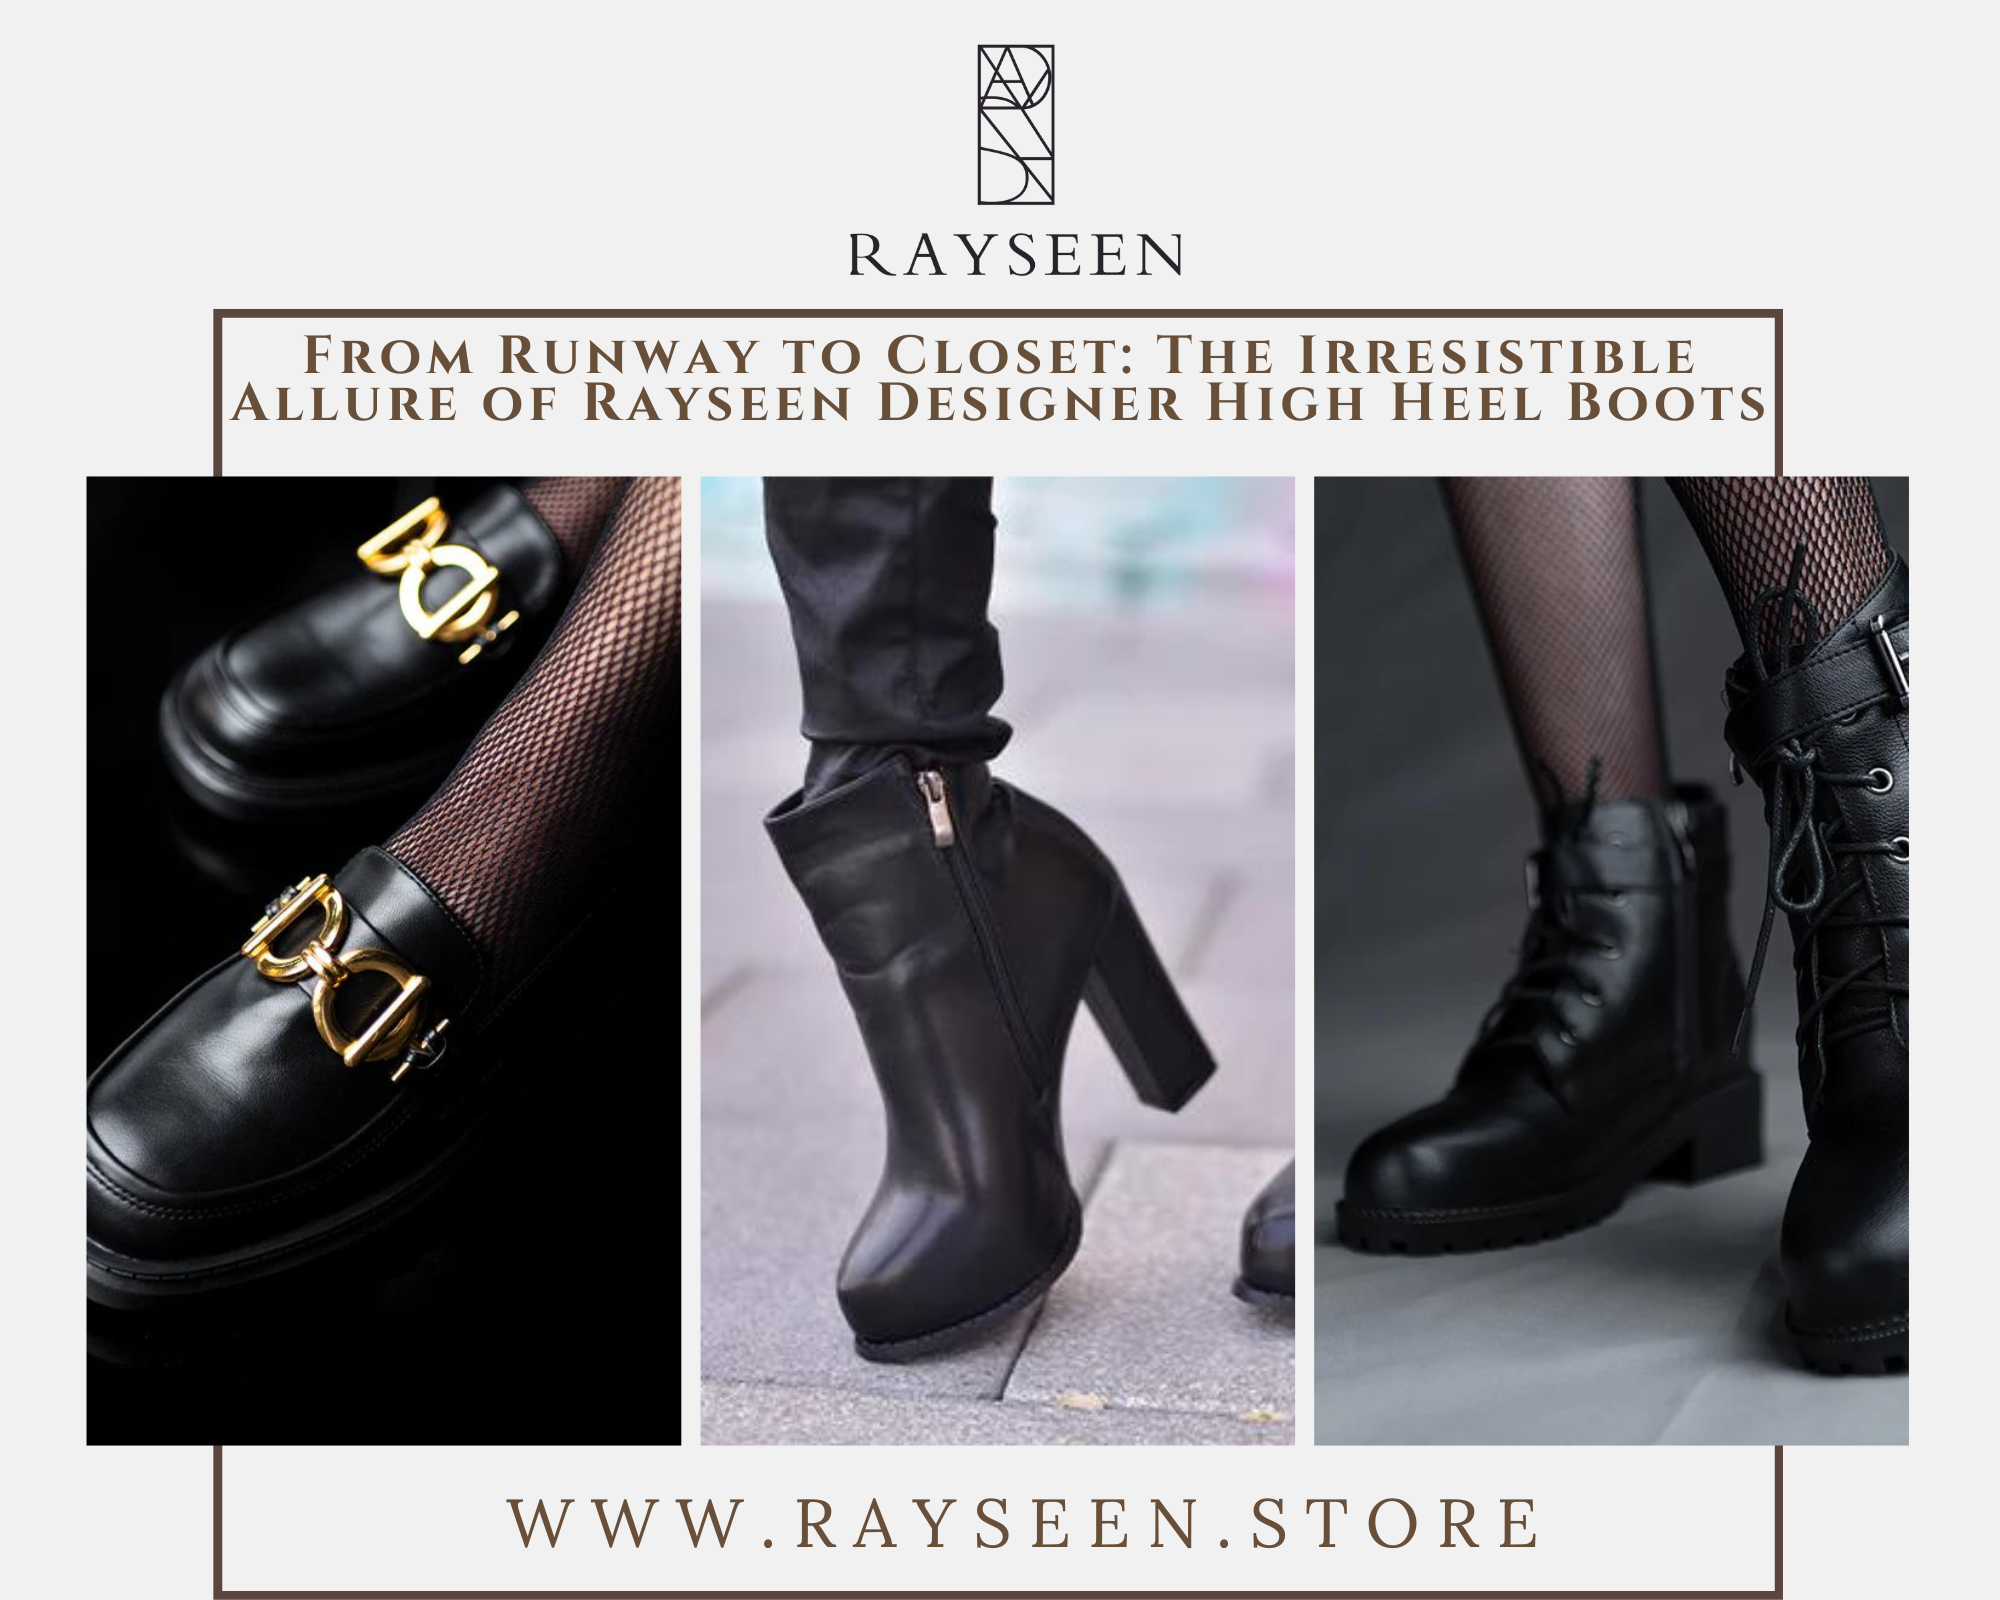 From Runway to Closet: The Irresistible Allure of Rayseen Designer High Heel Boots